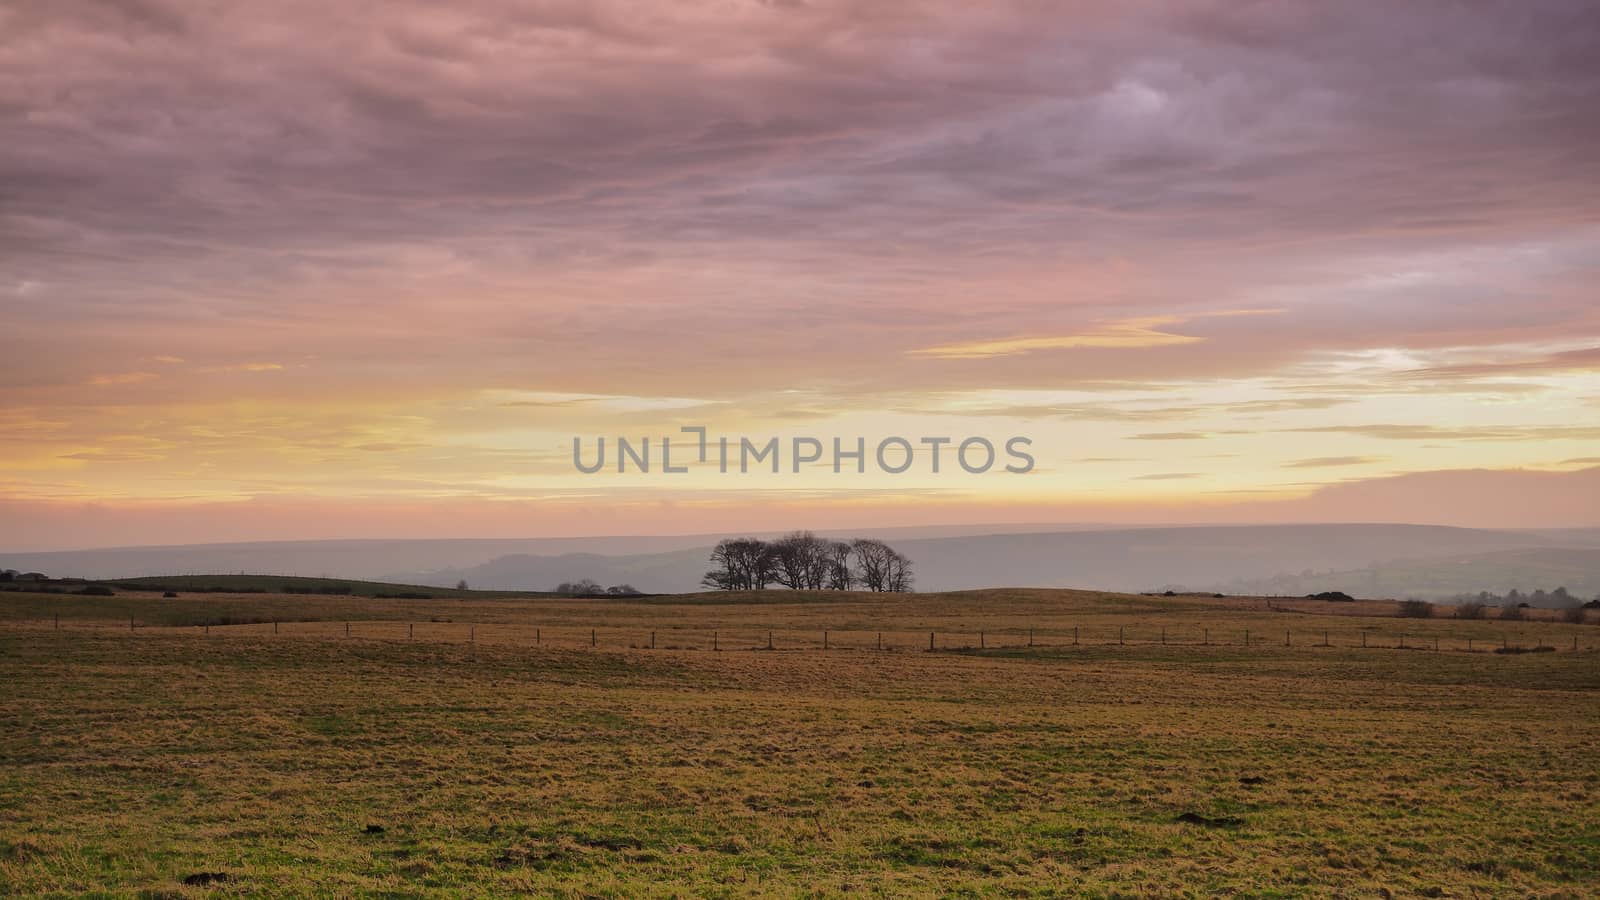 Sunset lighting up the clouds over Danby Moor, North York Moors National Park by PhilHarland